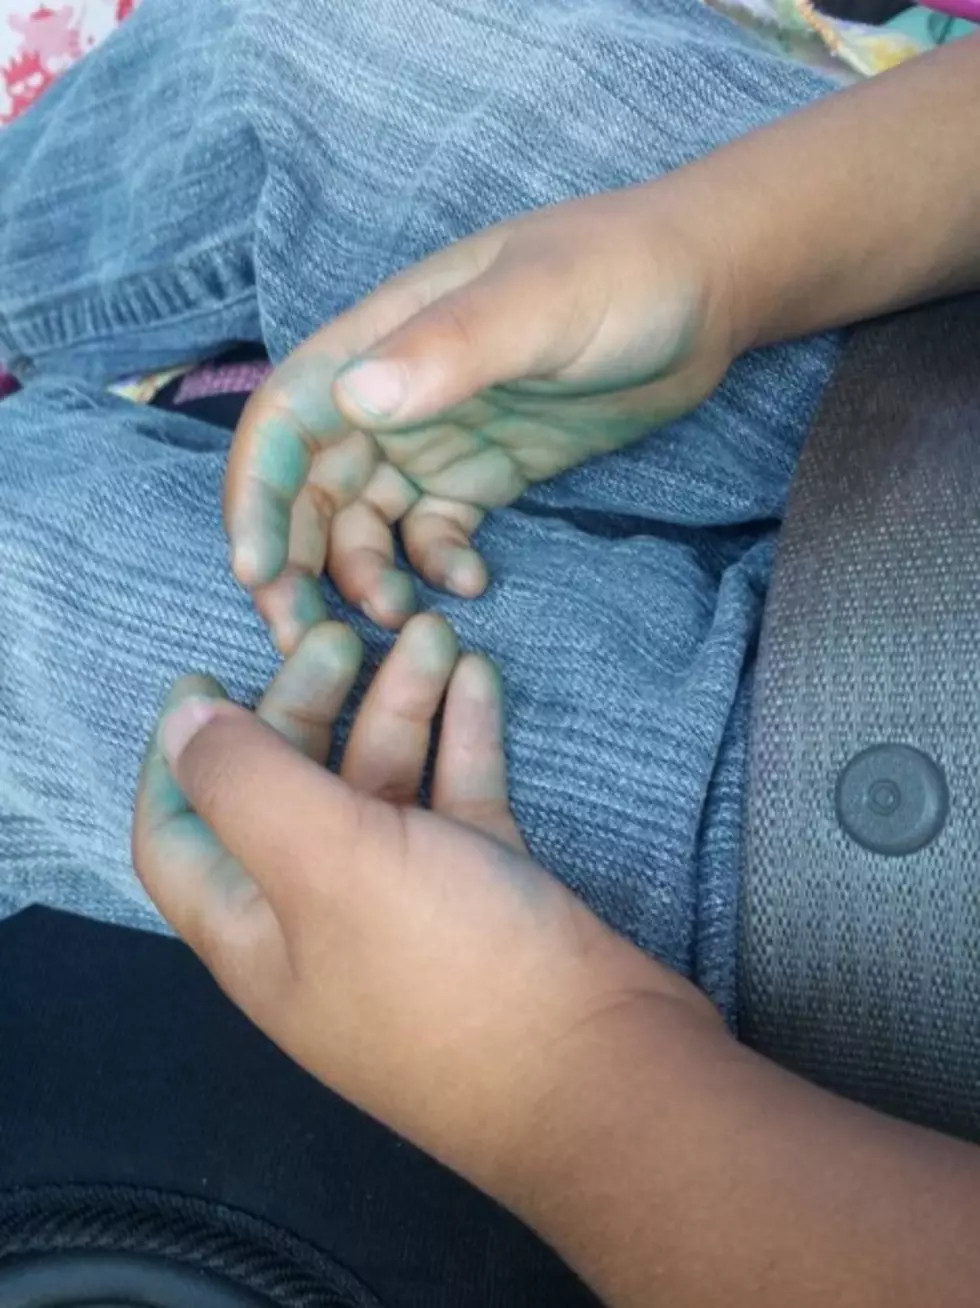 Crazy Stuff Your Kids Do: My Child Dyed Herself Blue Yesterday